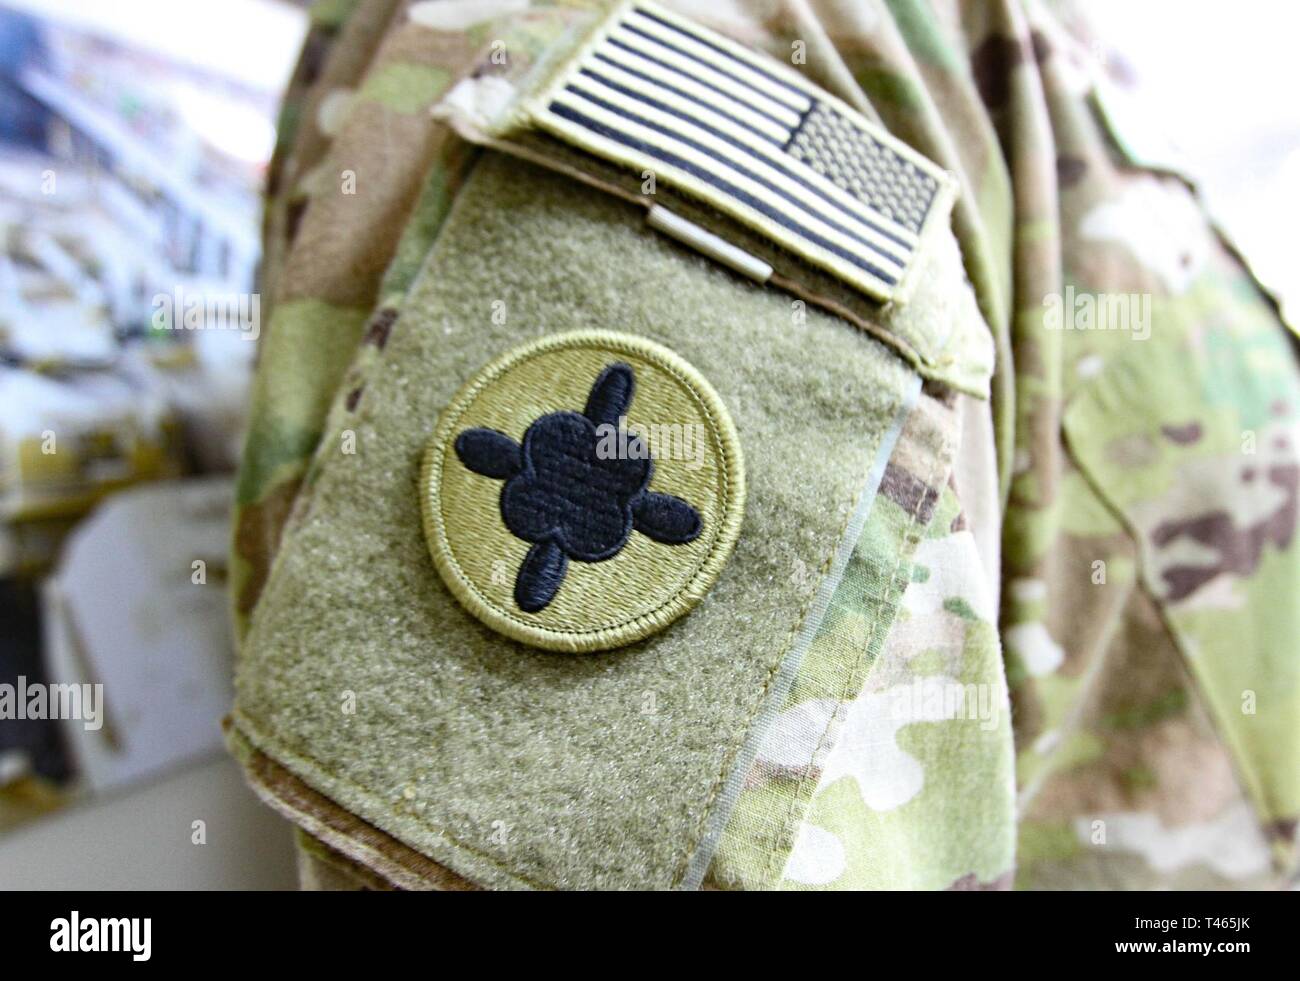 184th Sustainment Command shoulder sleeve insignia, or patch, is worn on a Soldier's right shoulder to show they deployed and served in a wartime environment with the 184th. Photo taken at Camp Arifjan Kuwait on Mar. 3, 2019. Stock Photo